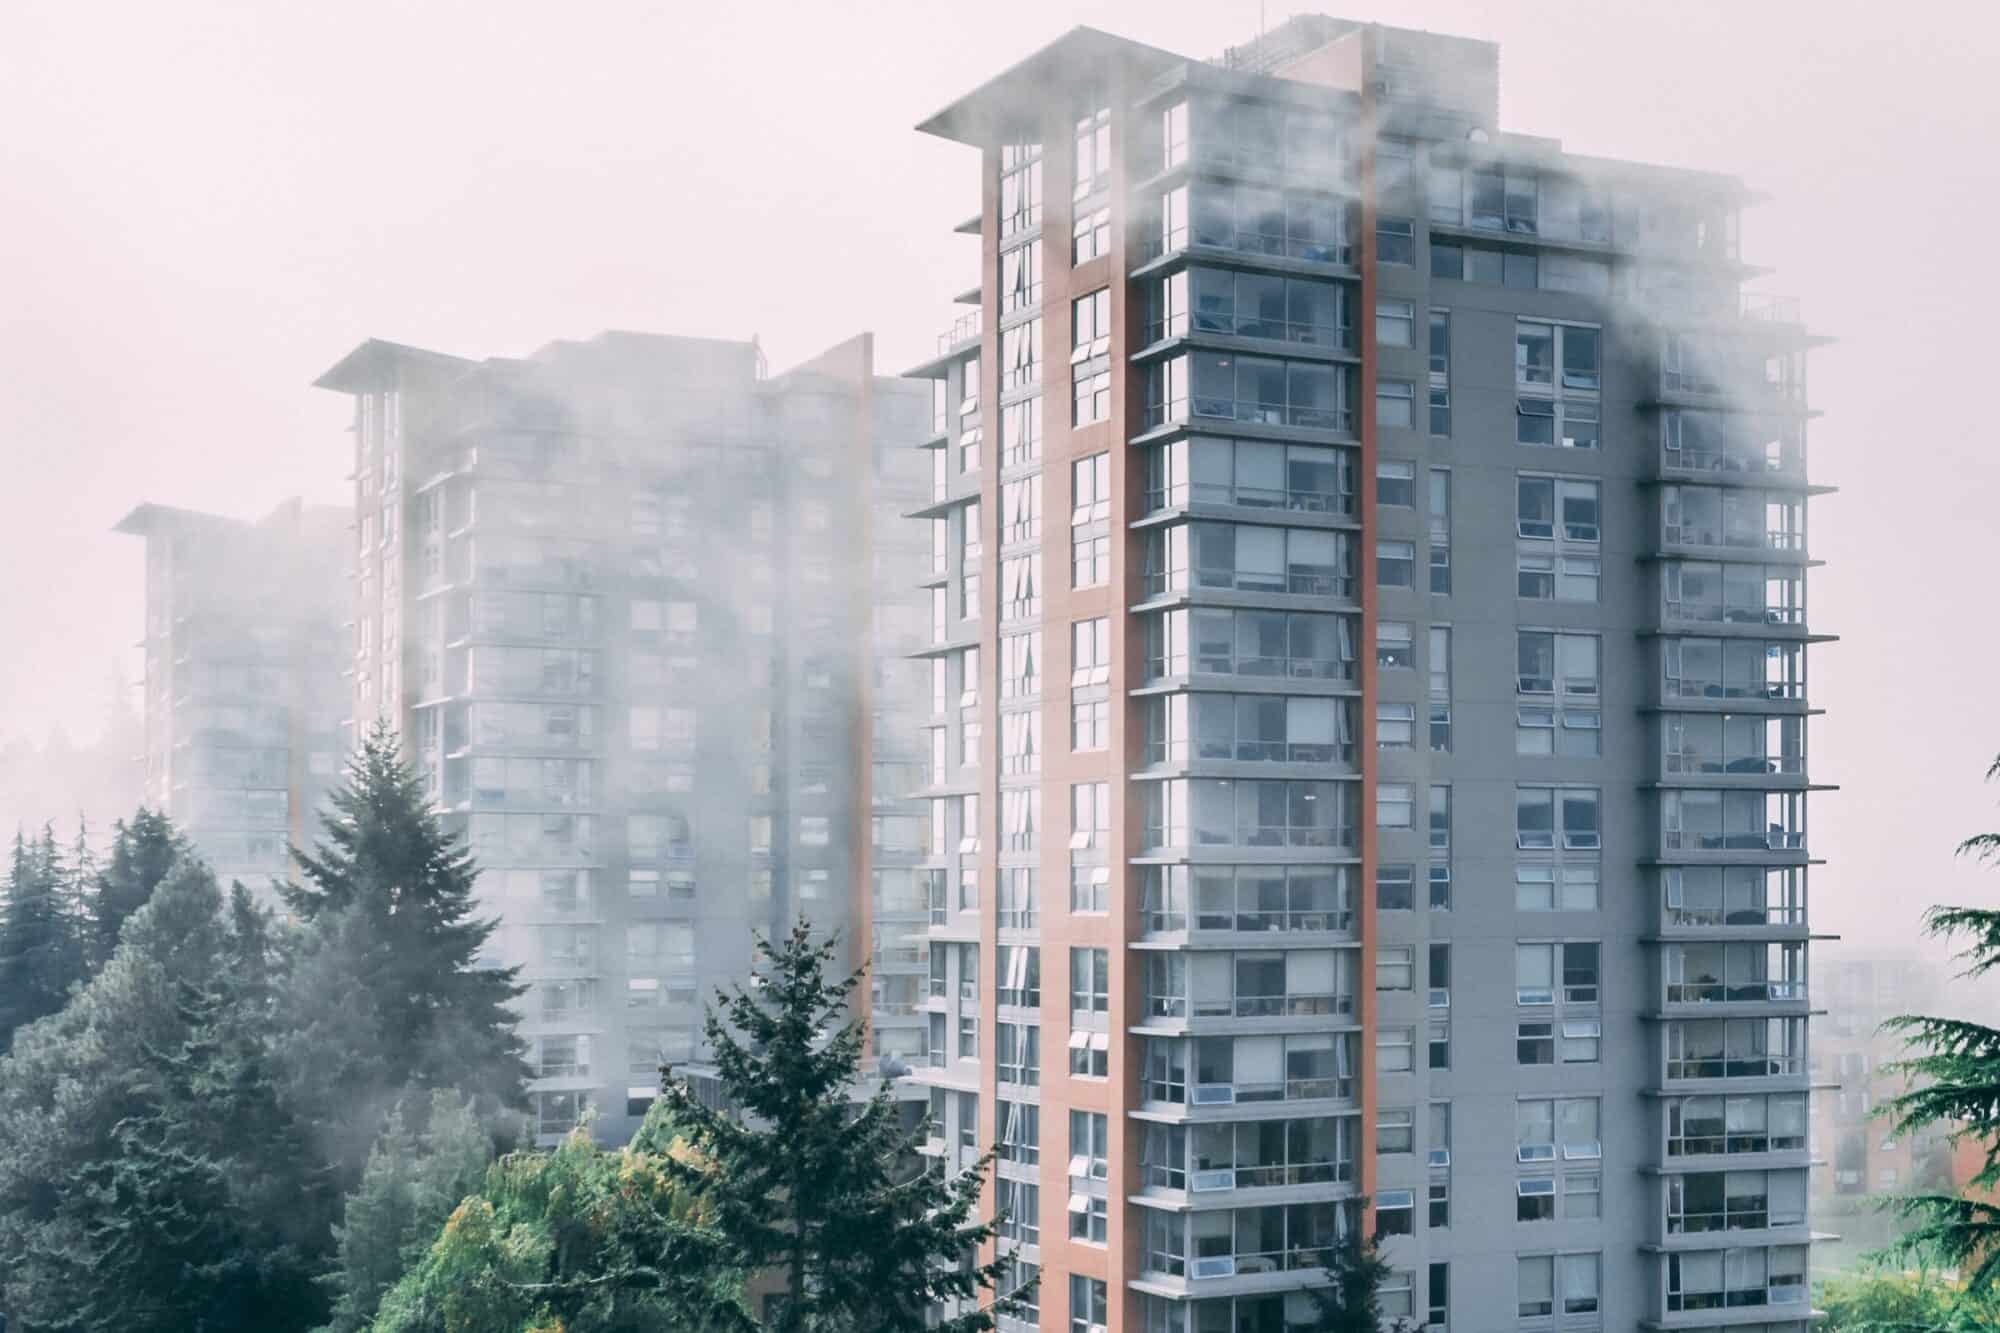 A trio of apartment buildings immersed in fog and coniferous trees, Vancouver, British Columbia.